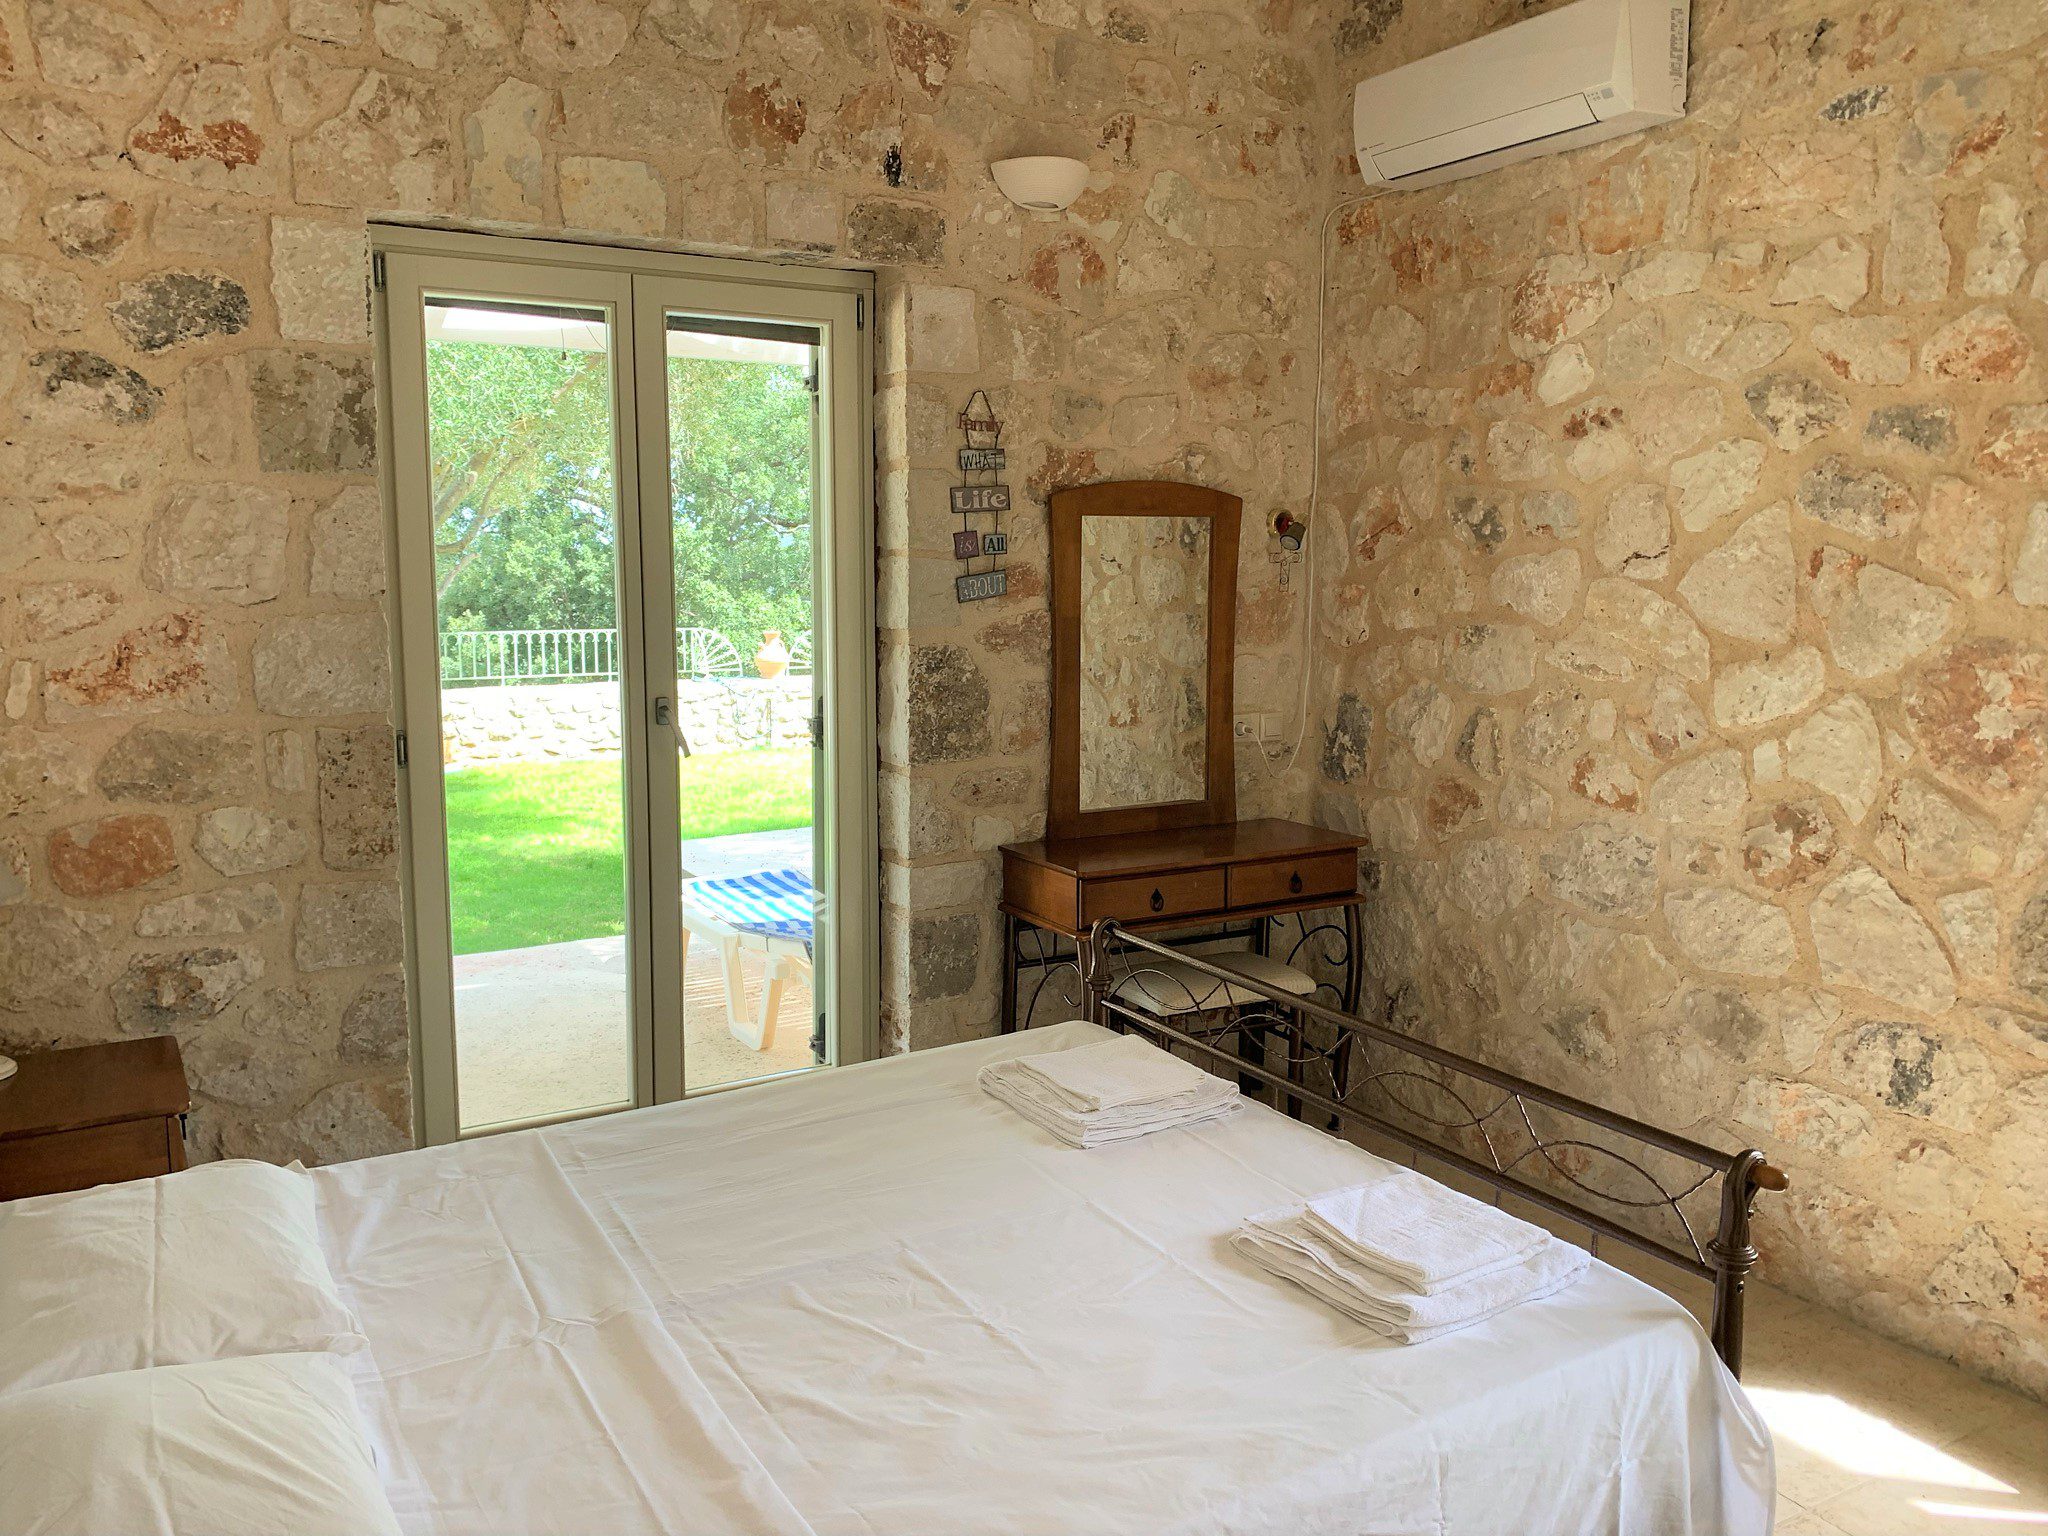 Bedroom of holiday houses for rent on Ithaca Greece, Stavros